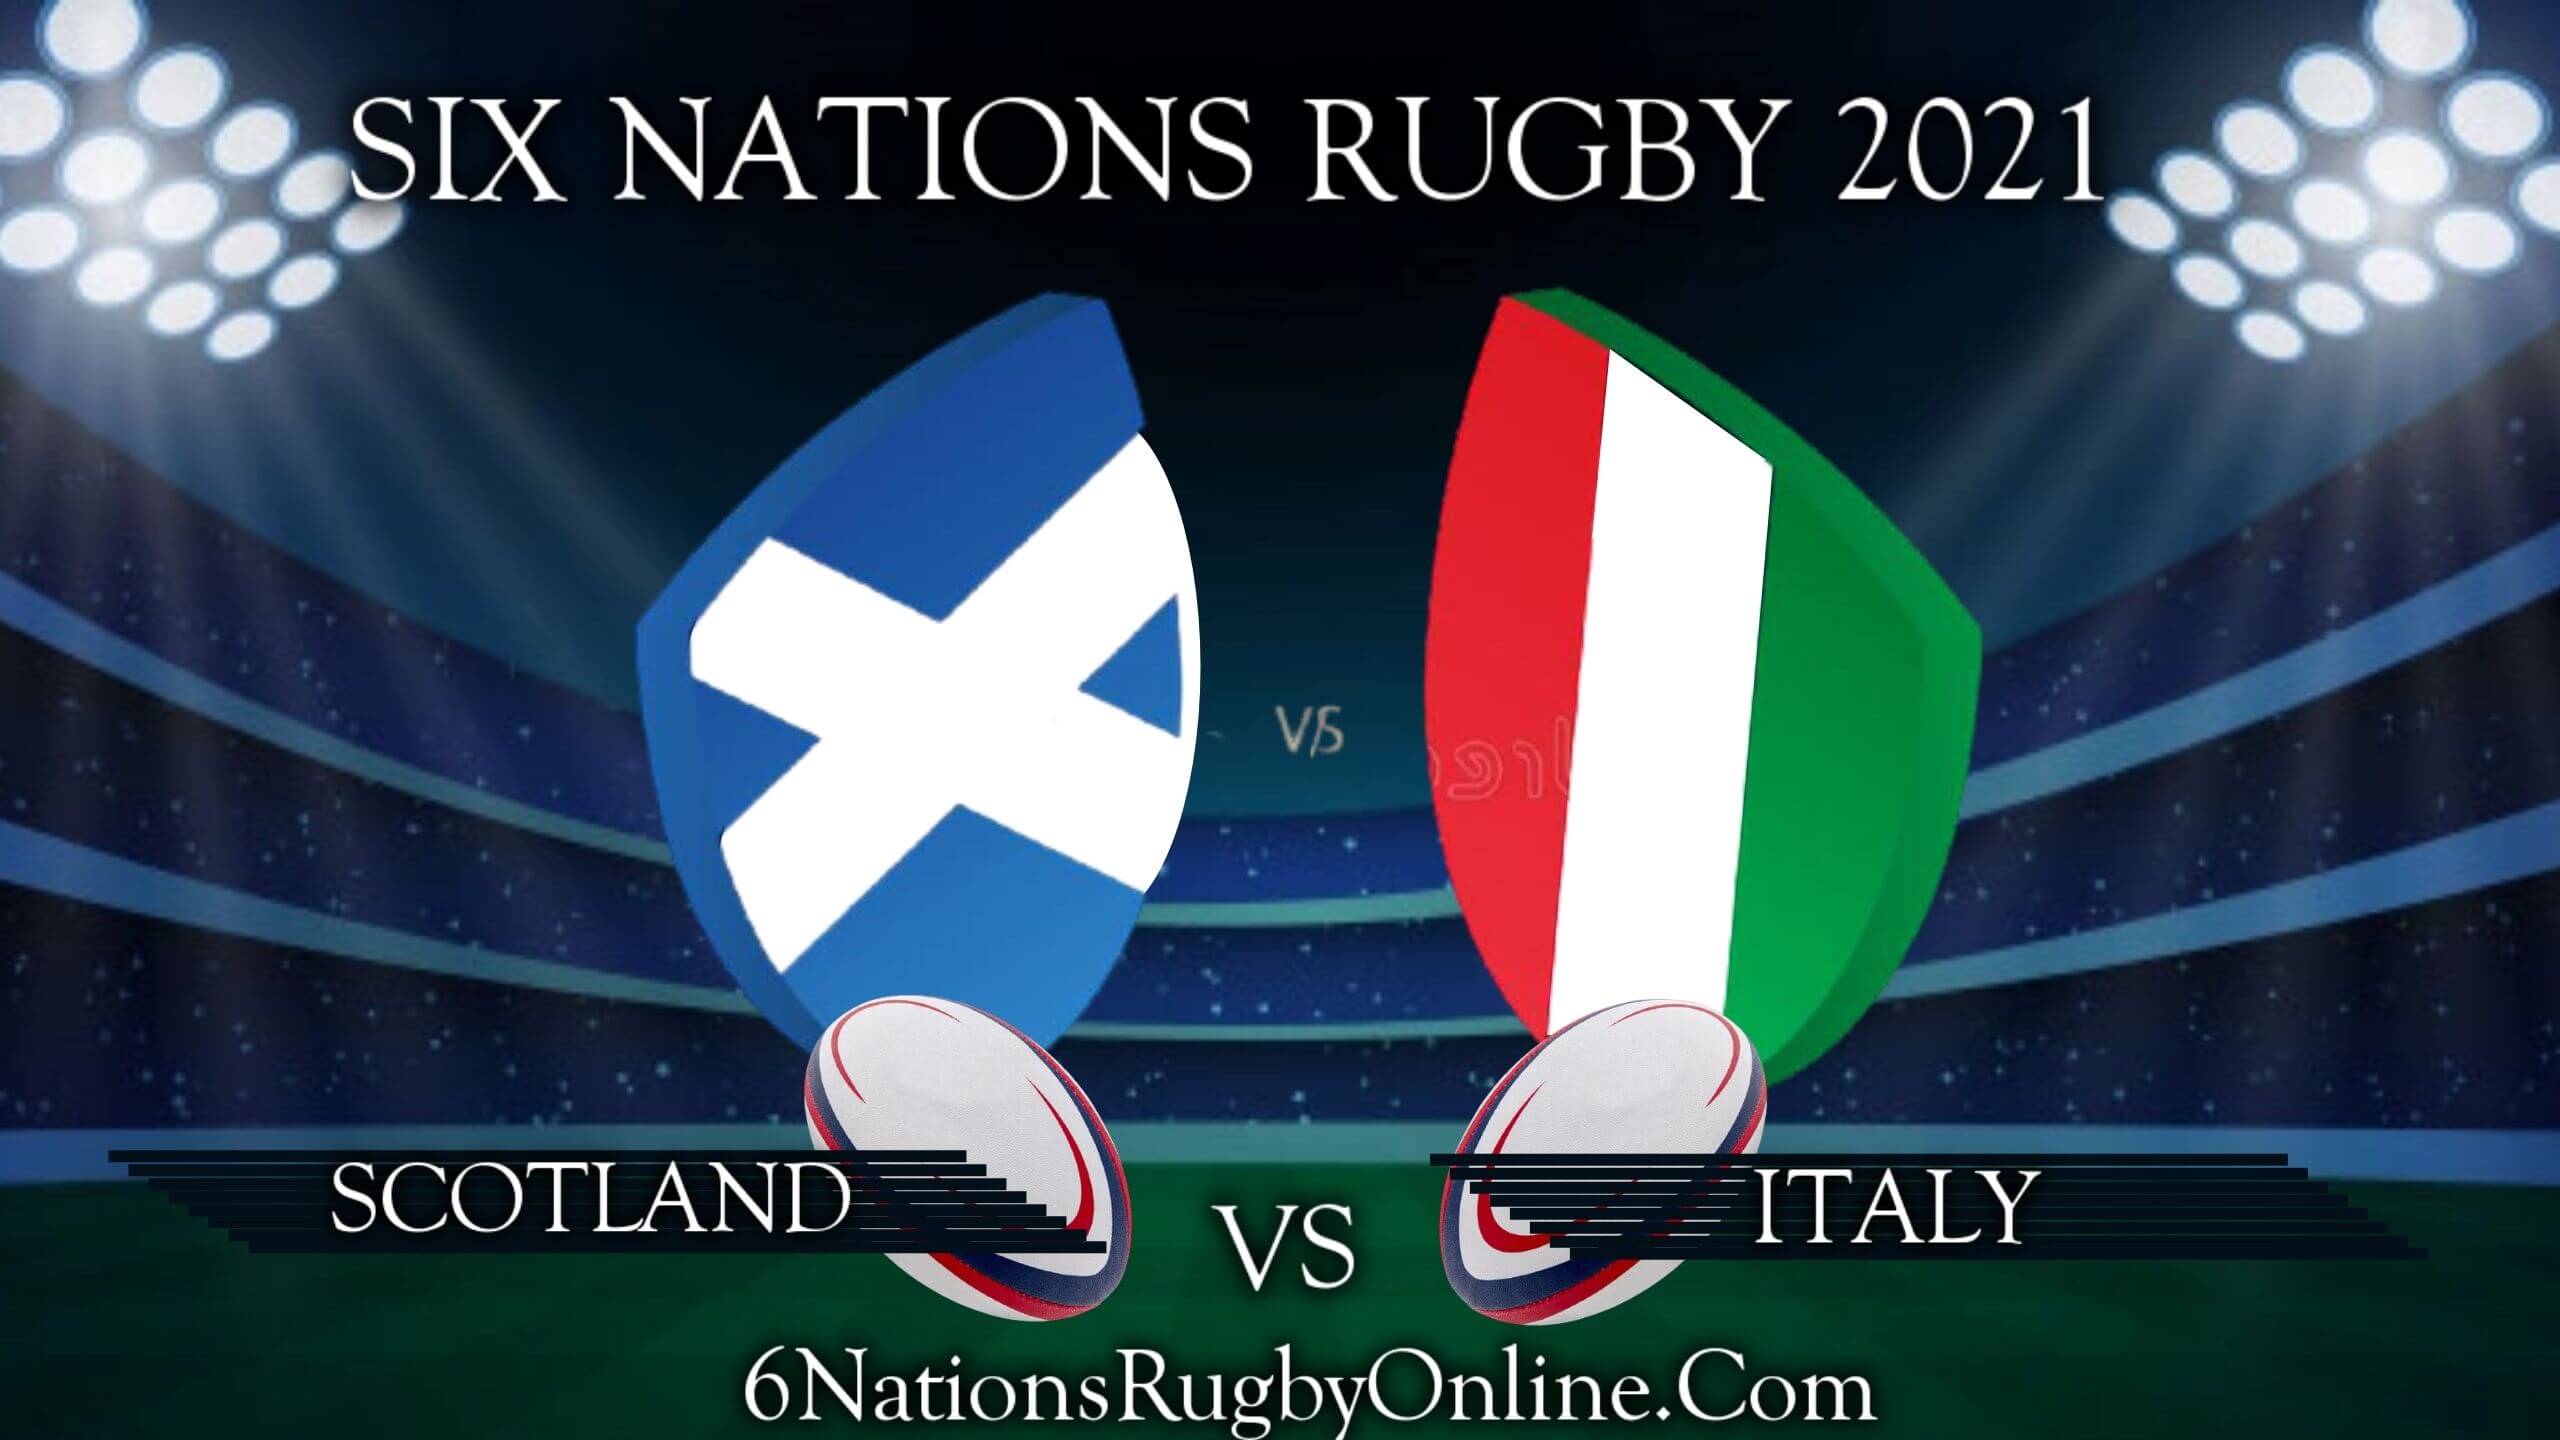 Scotland vs Italy Result 2021 Rd 5 | Six Nations Rugby